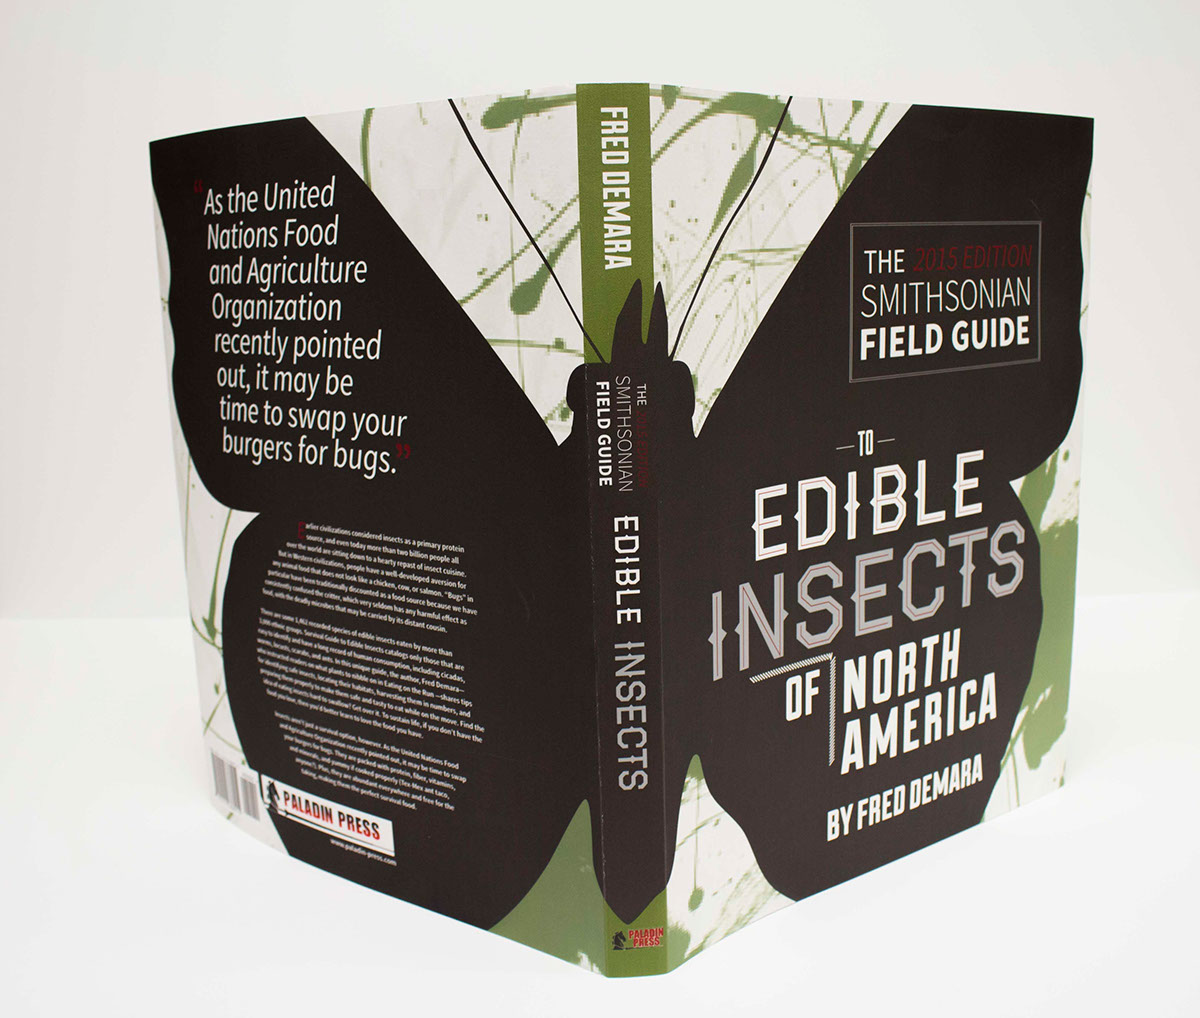 smithsonian field Guide compendium type insect poison edible print pixel motion book jacket cover series